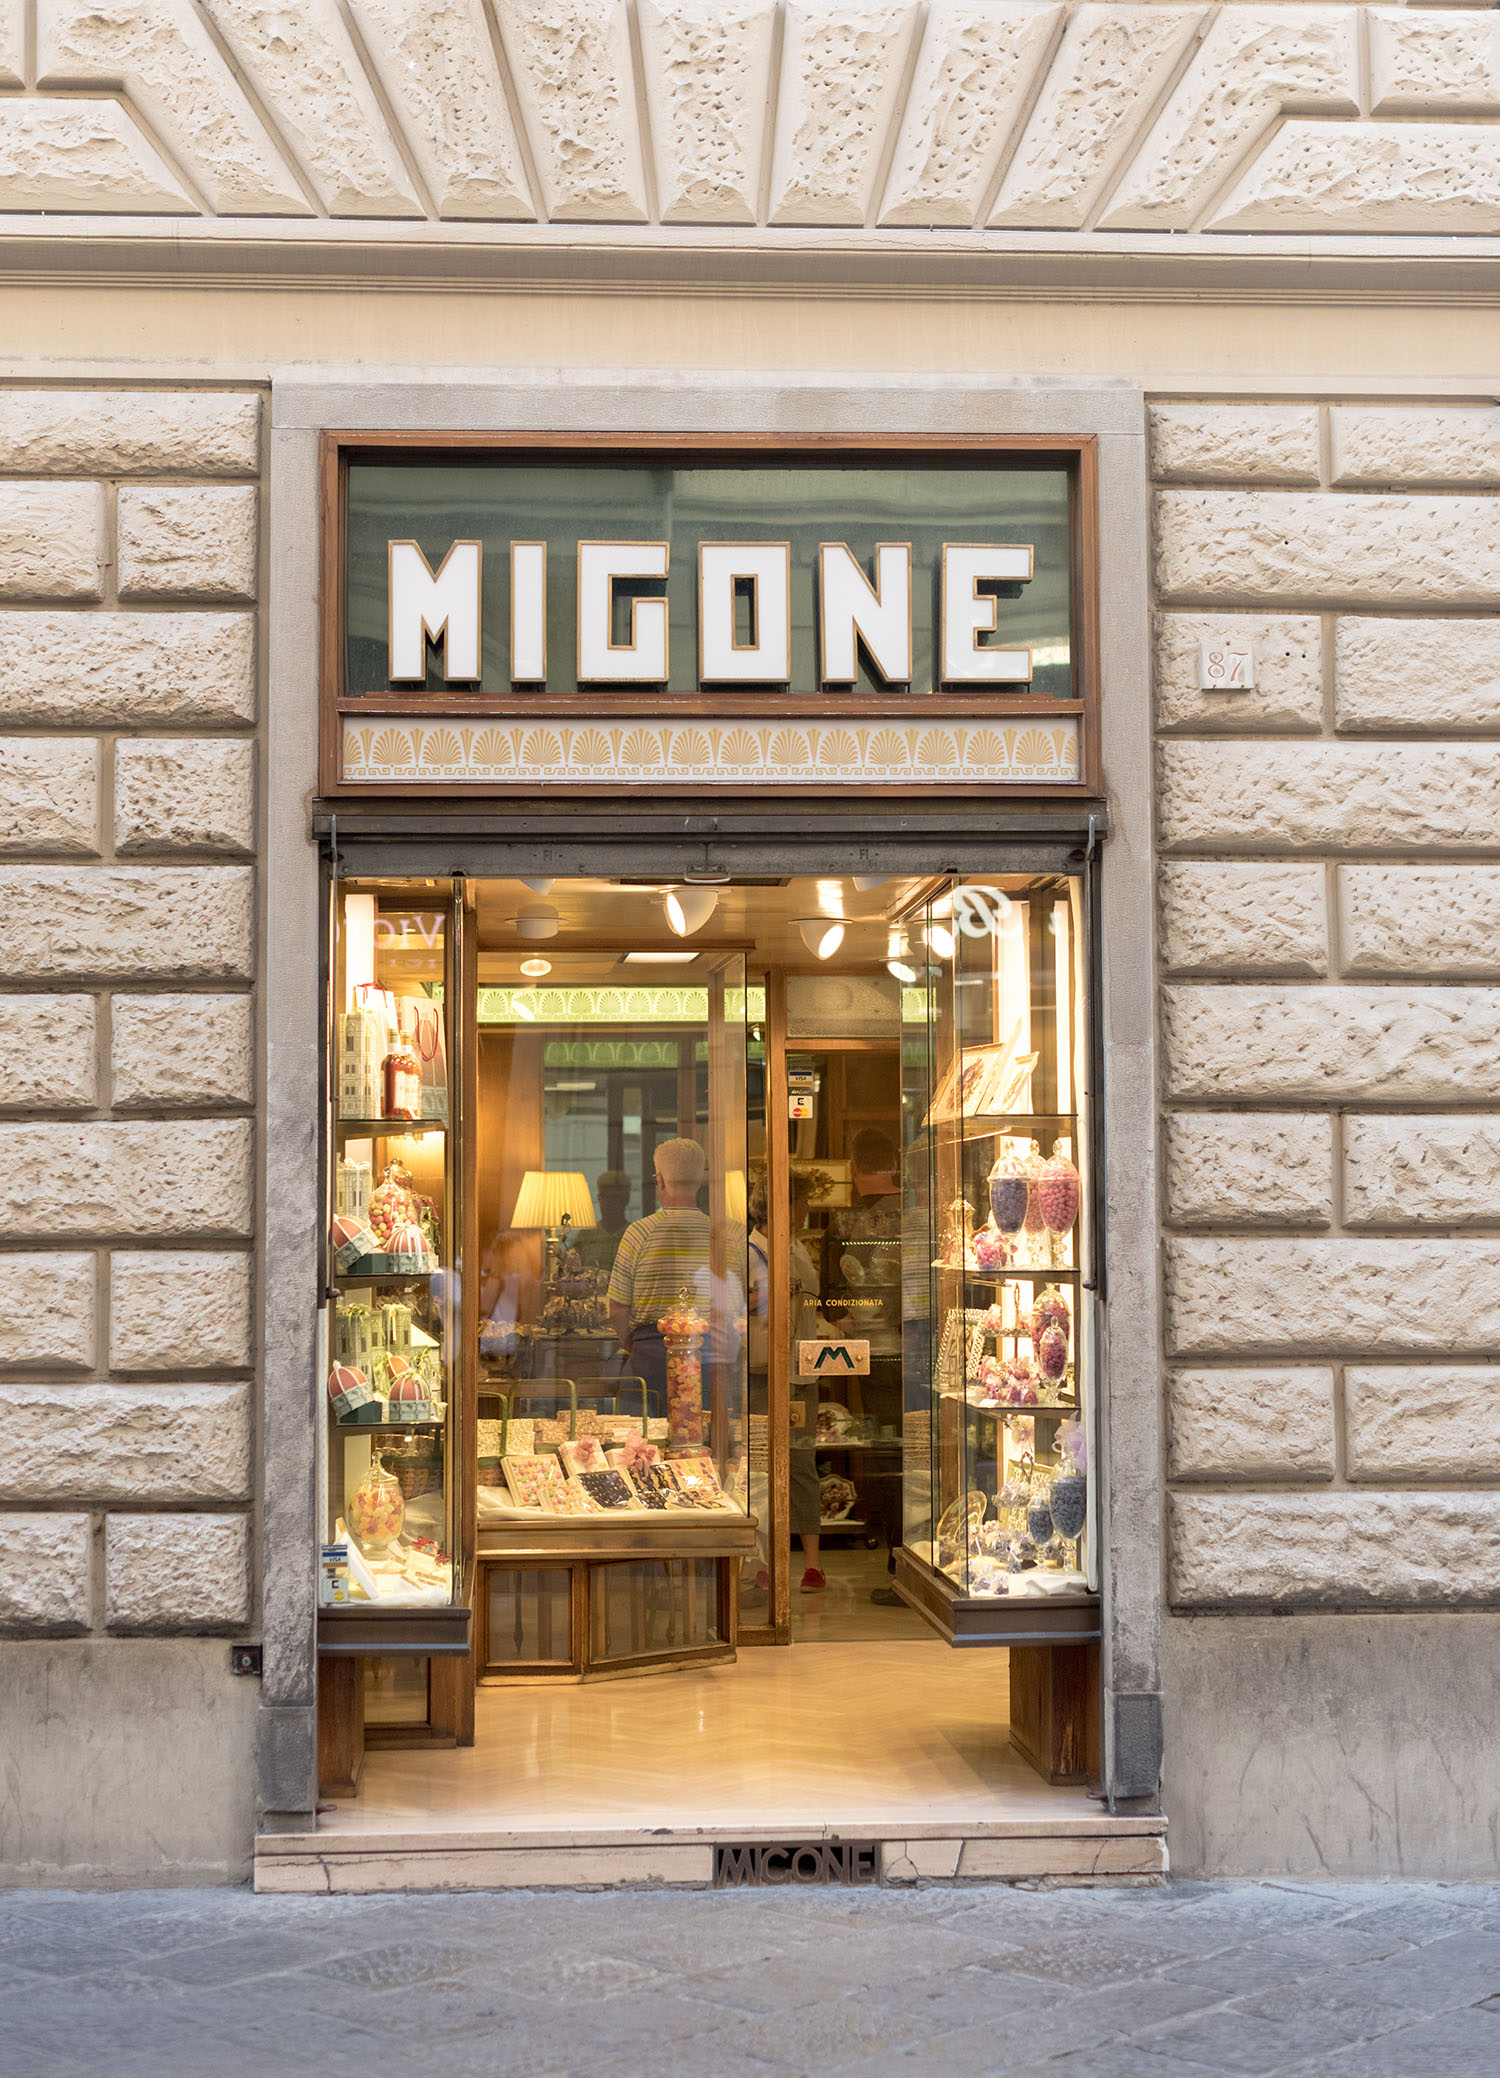 The storefront of Migone in Florence, Italy, as captured by top Canadian travel blogger Cee Fardoe of Coco & Vera